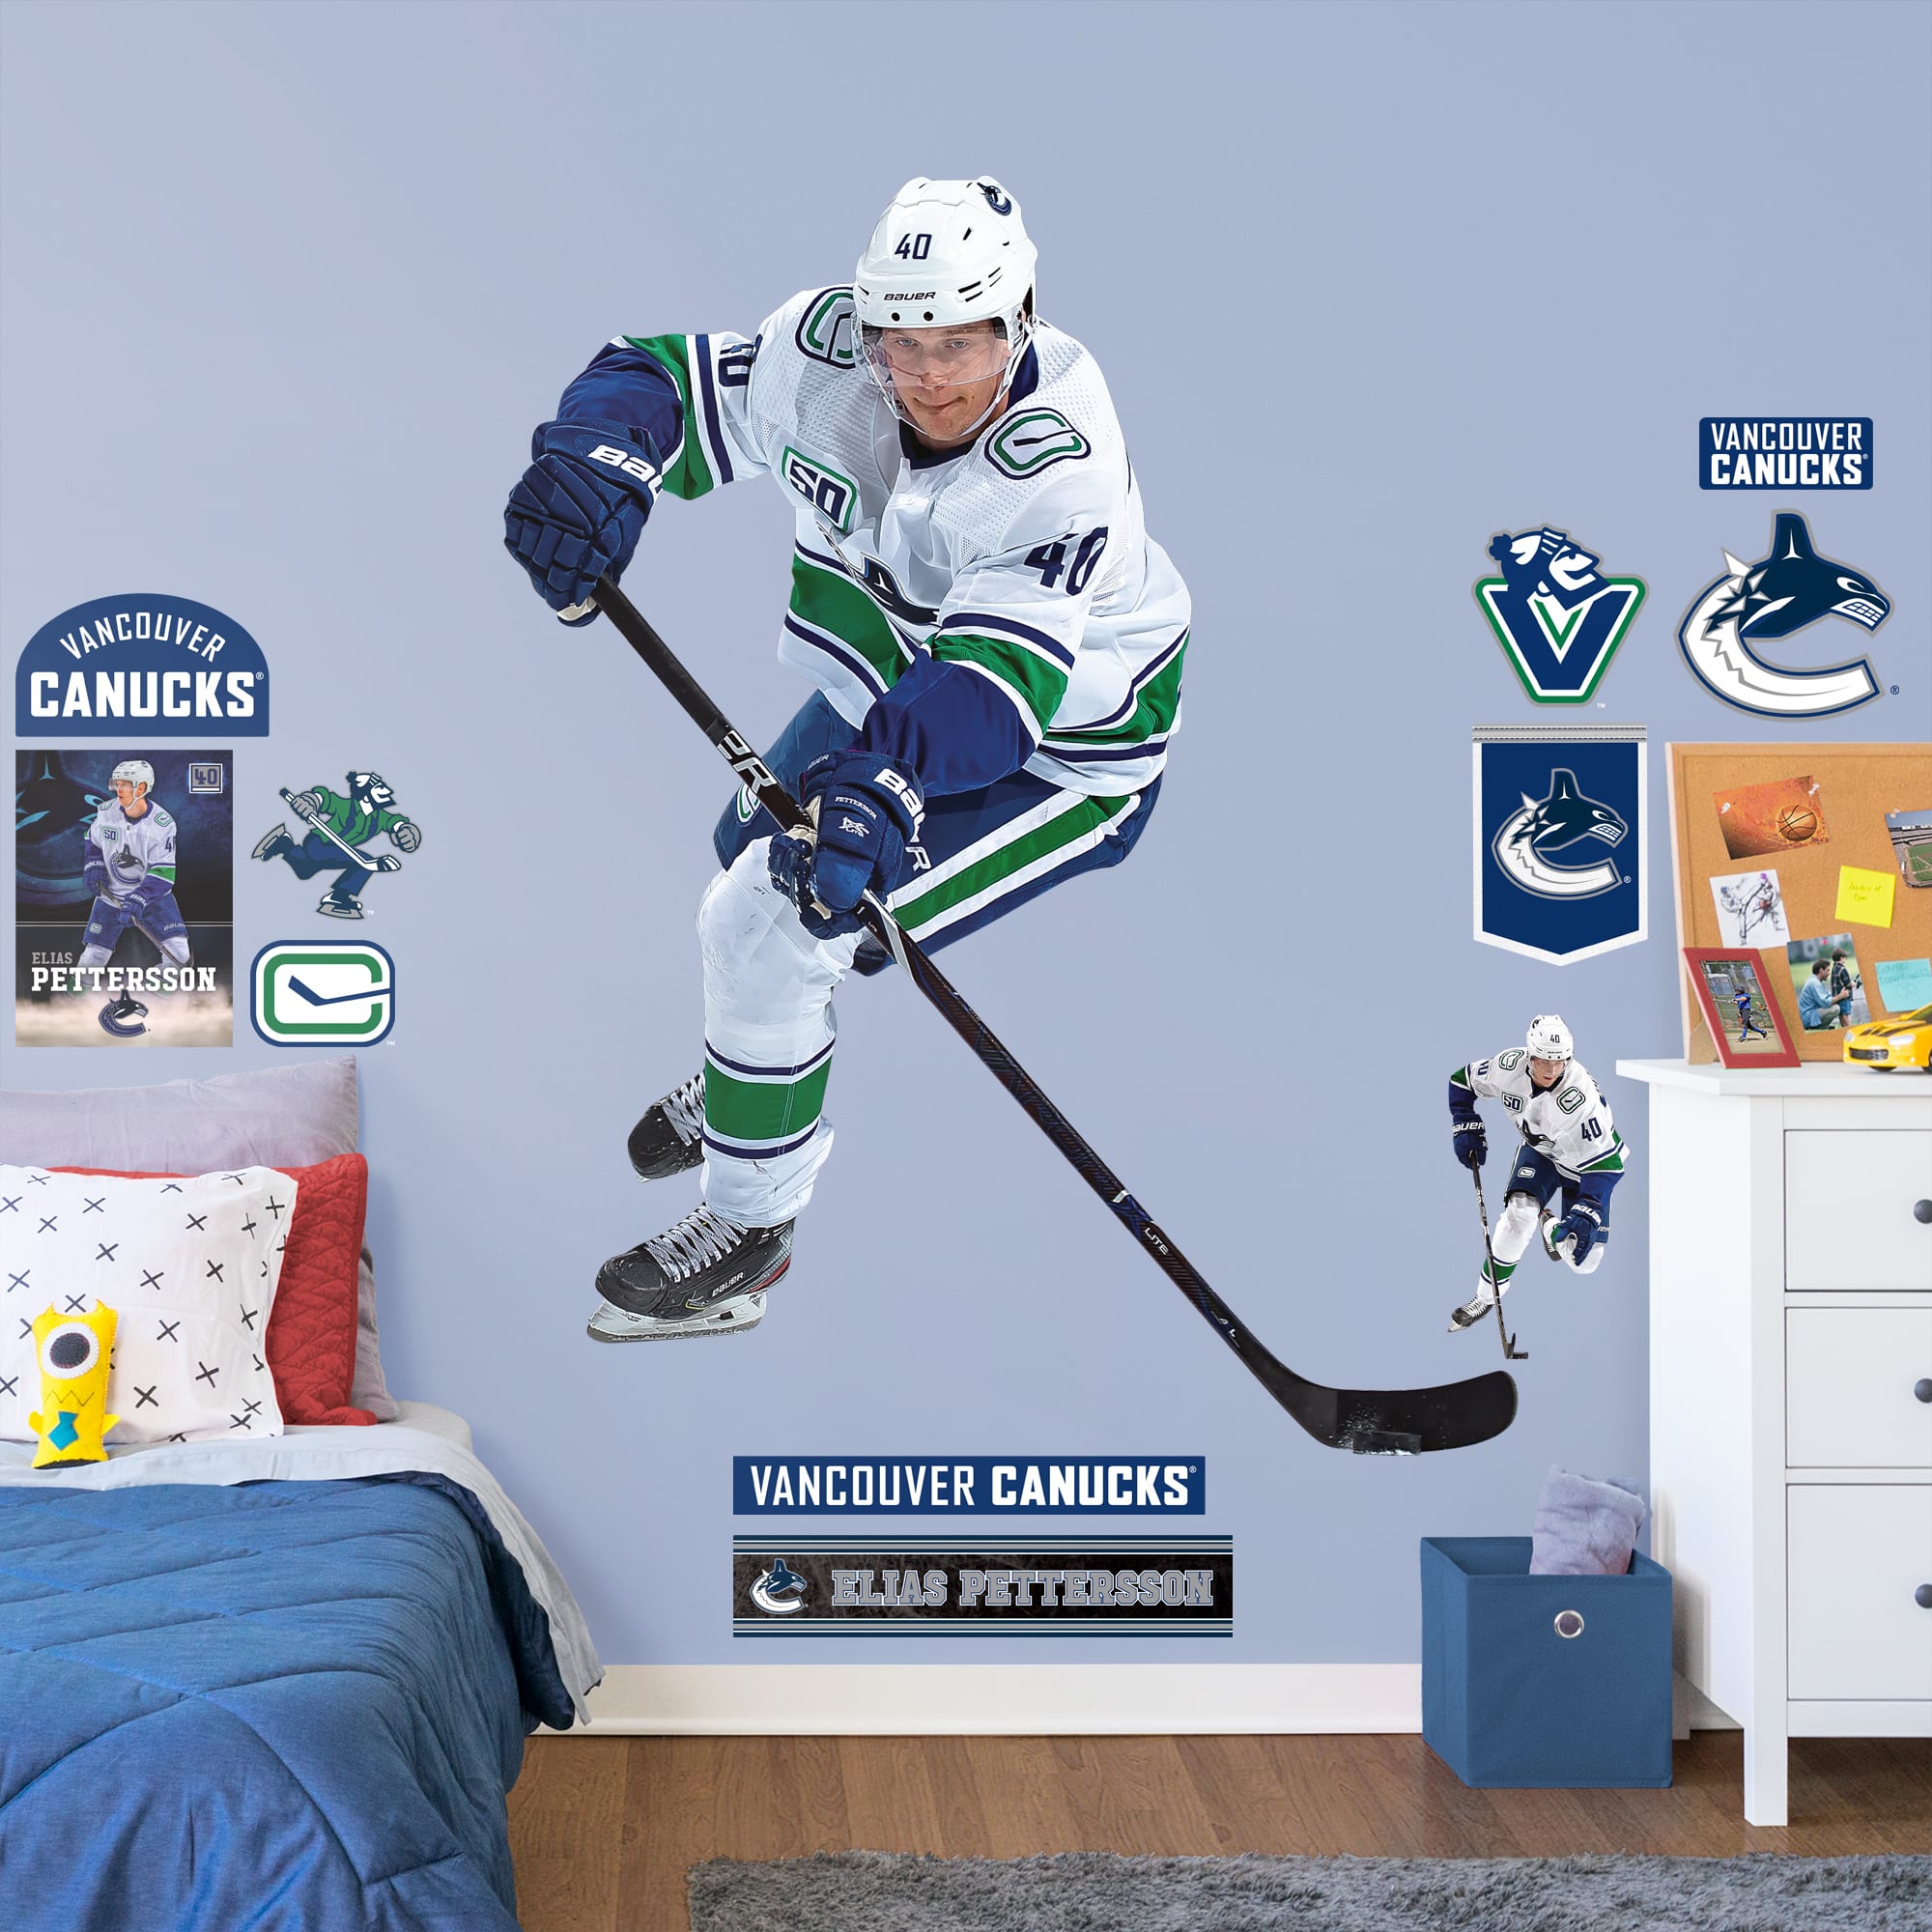 Elias Pettersson for Vancouver Canucks - Officially Licensed NHL Removable Wall Decal Life-Size Athlete + 11 Decals (61"W x 77"H